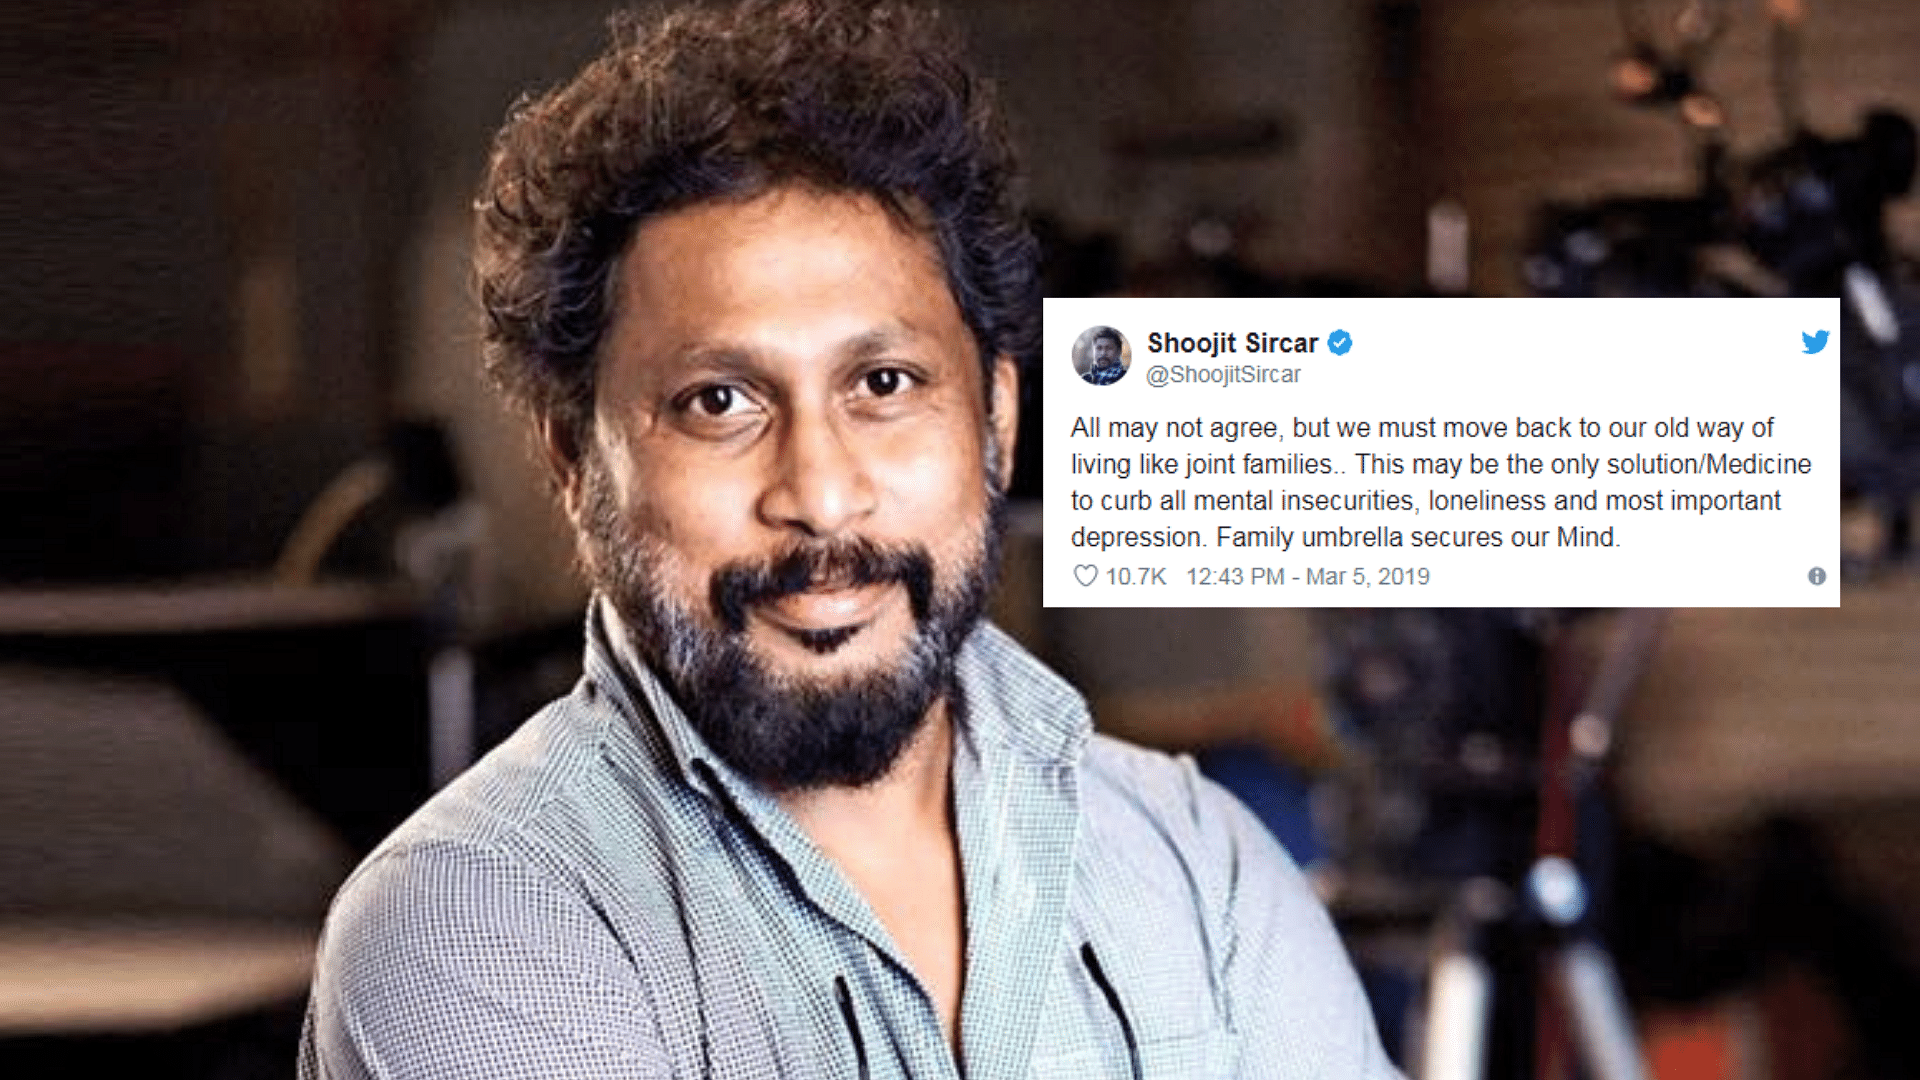 Filmmaker Shoojit Sircar’s ‘umbrella statement’ on the ‘family umbrella’ has stirred up a storm on Twitter.